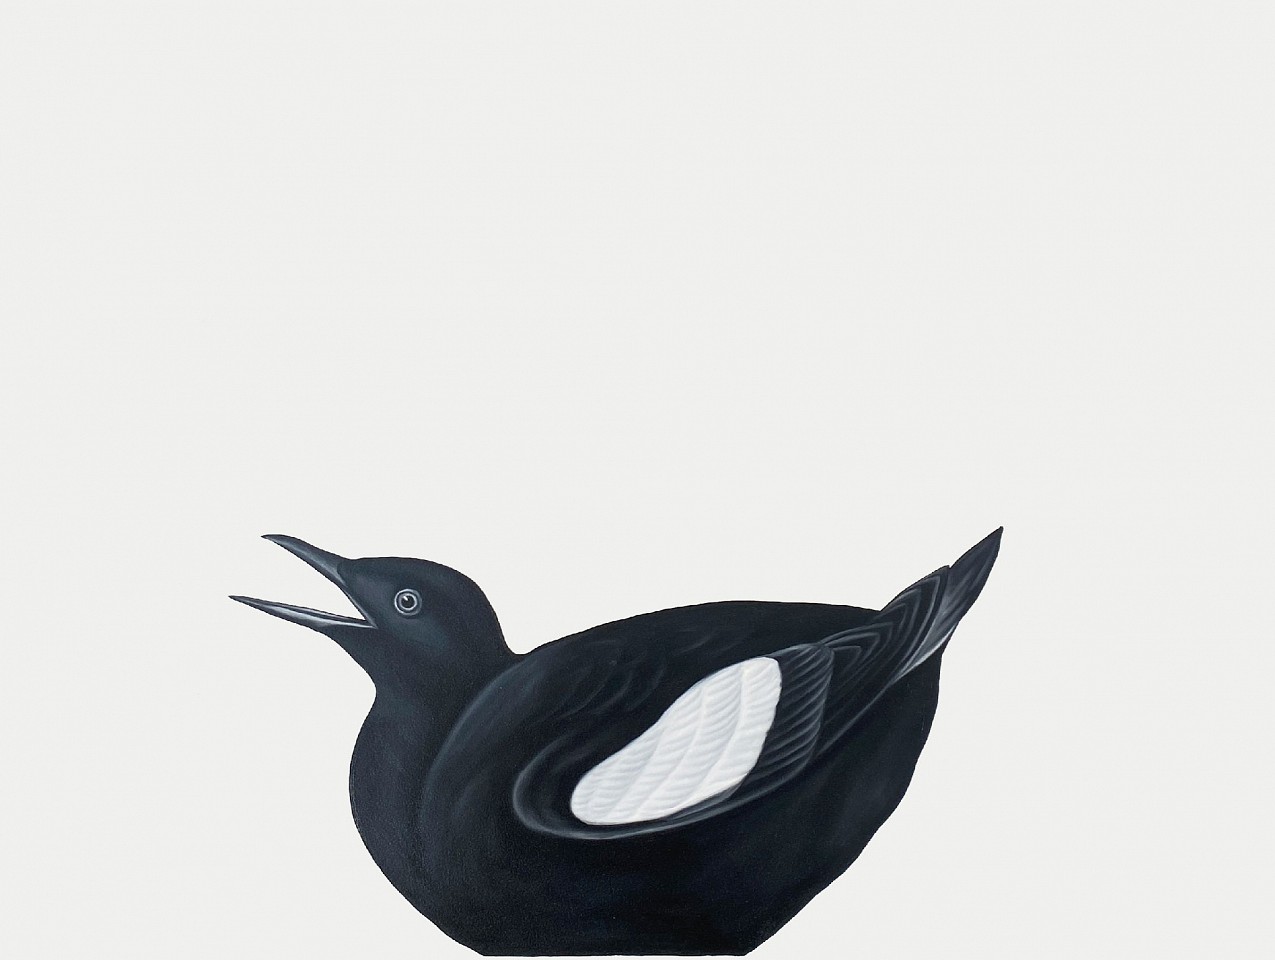 Shelley Reed
Black Guillemot (after Audubon), 2024
REE286
oil on paper, 22 x 30 inches